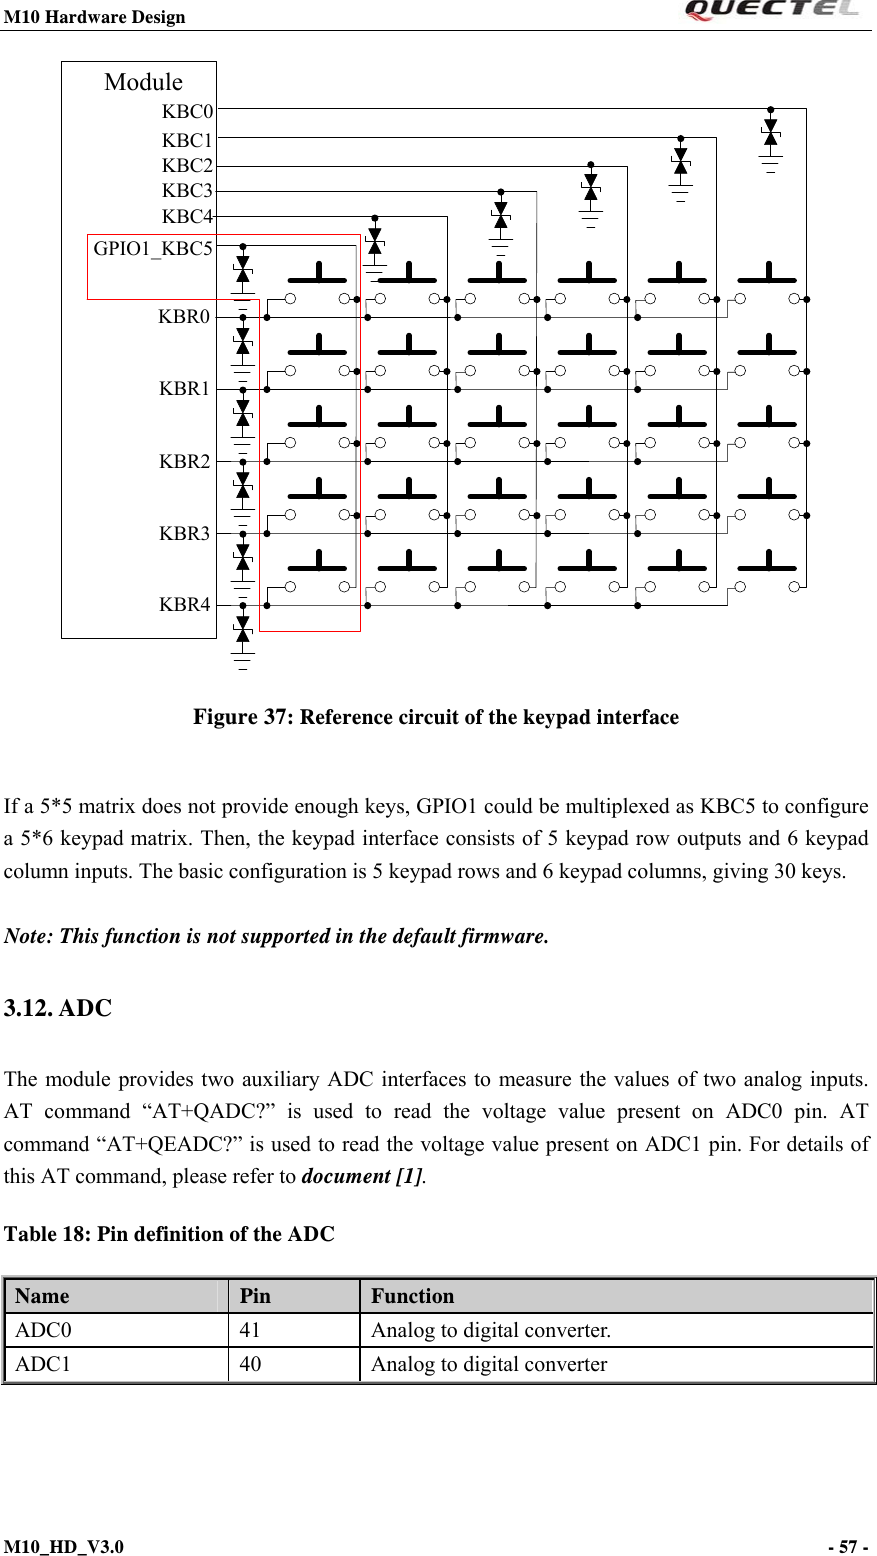 M10 Hardware Design                                                                 M10_HD_V3.0                                                                      - 57 -  KBR4KBR3KBR2KBR1KBR0KBC0KBC1KBC2KBC3KBC4ModuleGPIO1_KBC5 Figure 37: Reference circuit of the keypad interface  If a 5*5 matrix does not provide enough keys, GPIO1 could be multiplexed as KBC5 to configure a 5*6 keypad matrix. Then, the keypad interface consists of 5 keypad row outputs and 6 keypad column inputs. The basic configuration is 5 keypad rows and 6 keypad columns, giving 30 keys.  Note: This function is not supported in the default firmware. 3.12. ADC The module provides two auxiliary ADC interfaces to measure the values of two analog inputs. AT command “AT+QADC?” is used to read the voltage value present on ADC0 pin. AT command “AT+QEADC?” is used to read the voltage value present on ADC1 pin. For details of this AT command, please refer to document [1]. Table 18: Pin definition of the ADC   Name   Pin   Function ADC0  41  Analog to digital converter. ADC1  40  Analog to digital converter      